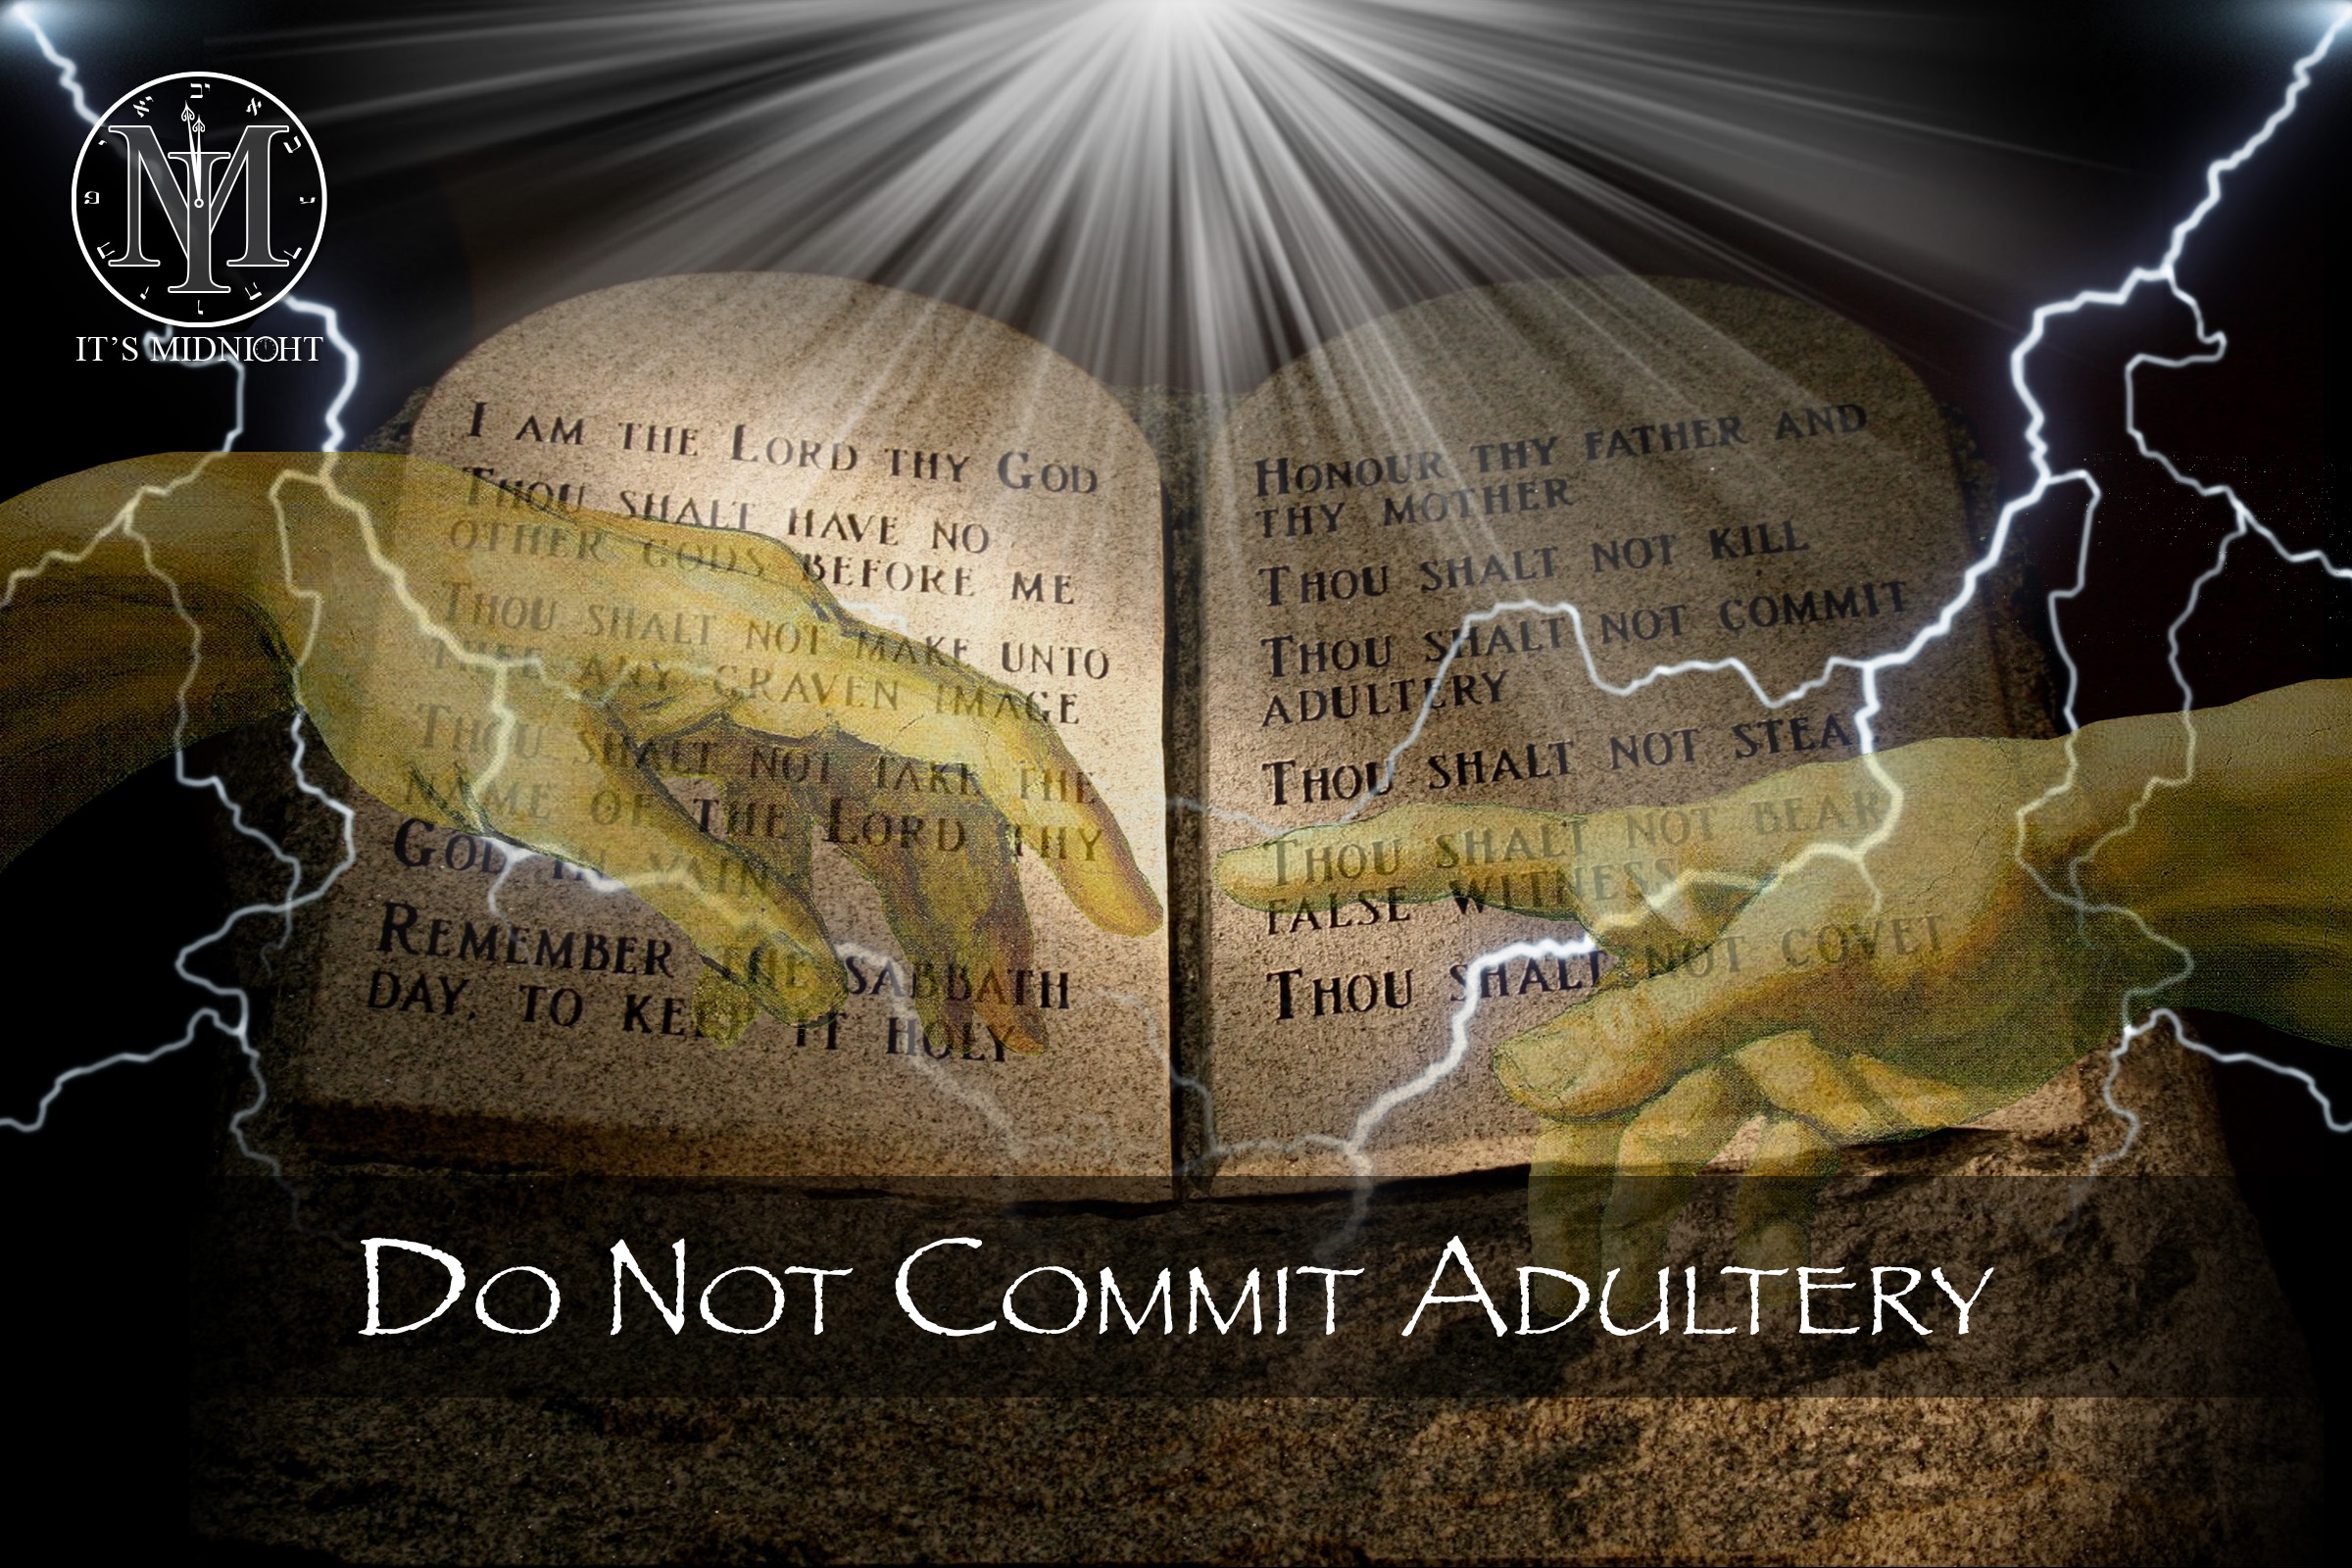 7th Commandment: Do Not Commit Adultery